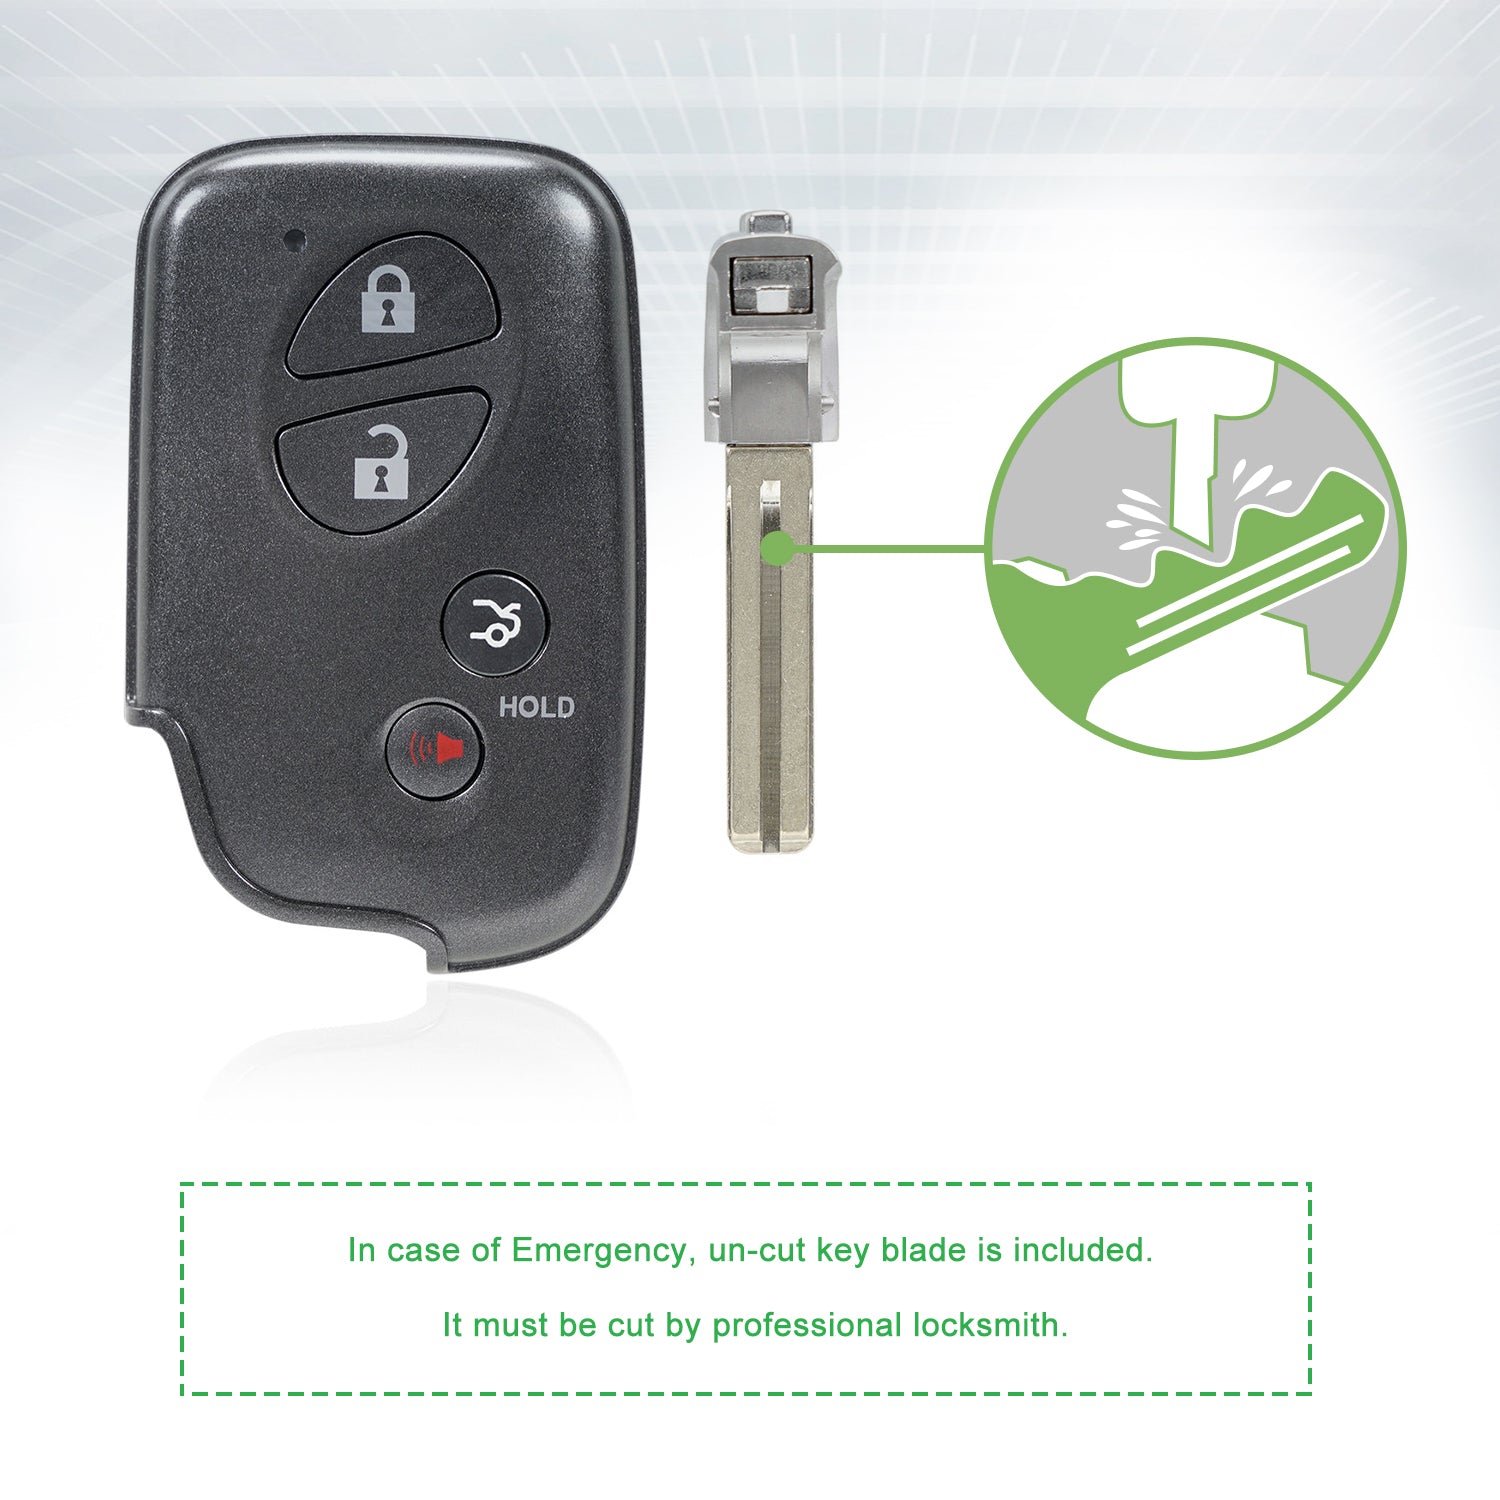 Extra-Partss Smart Car Key Fob Replacement for Lexus IS250 IS350 ES350 GS350 GS460 LS460 fits 2009 2010 2011 2012 Proximity 4 Button Remote HYQ14AAB 3370 E Board